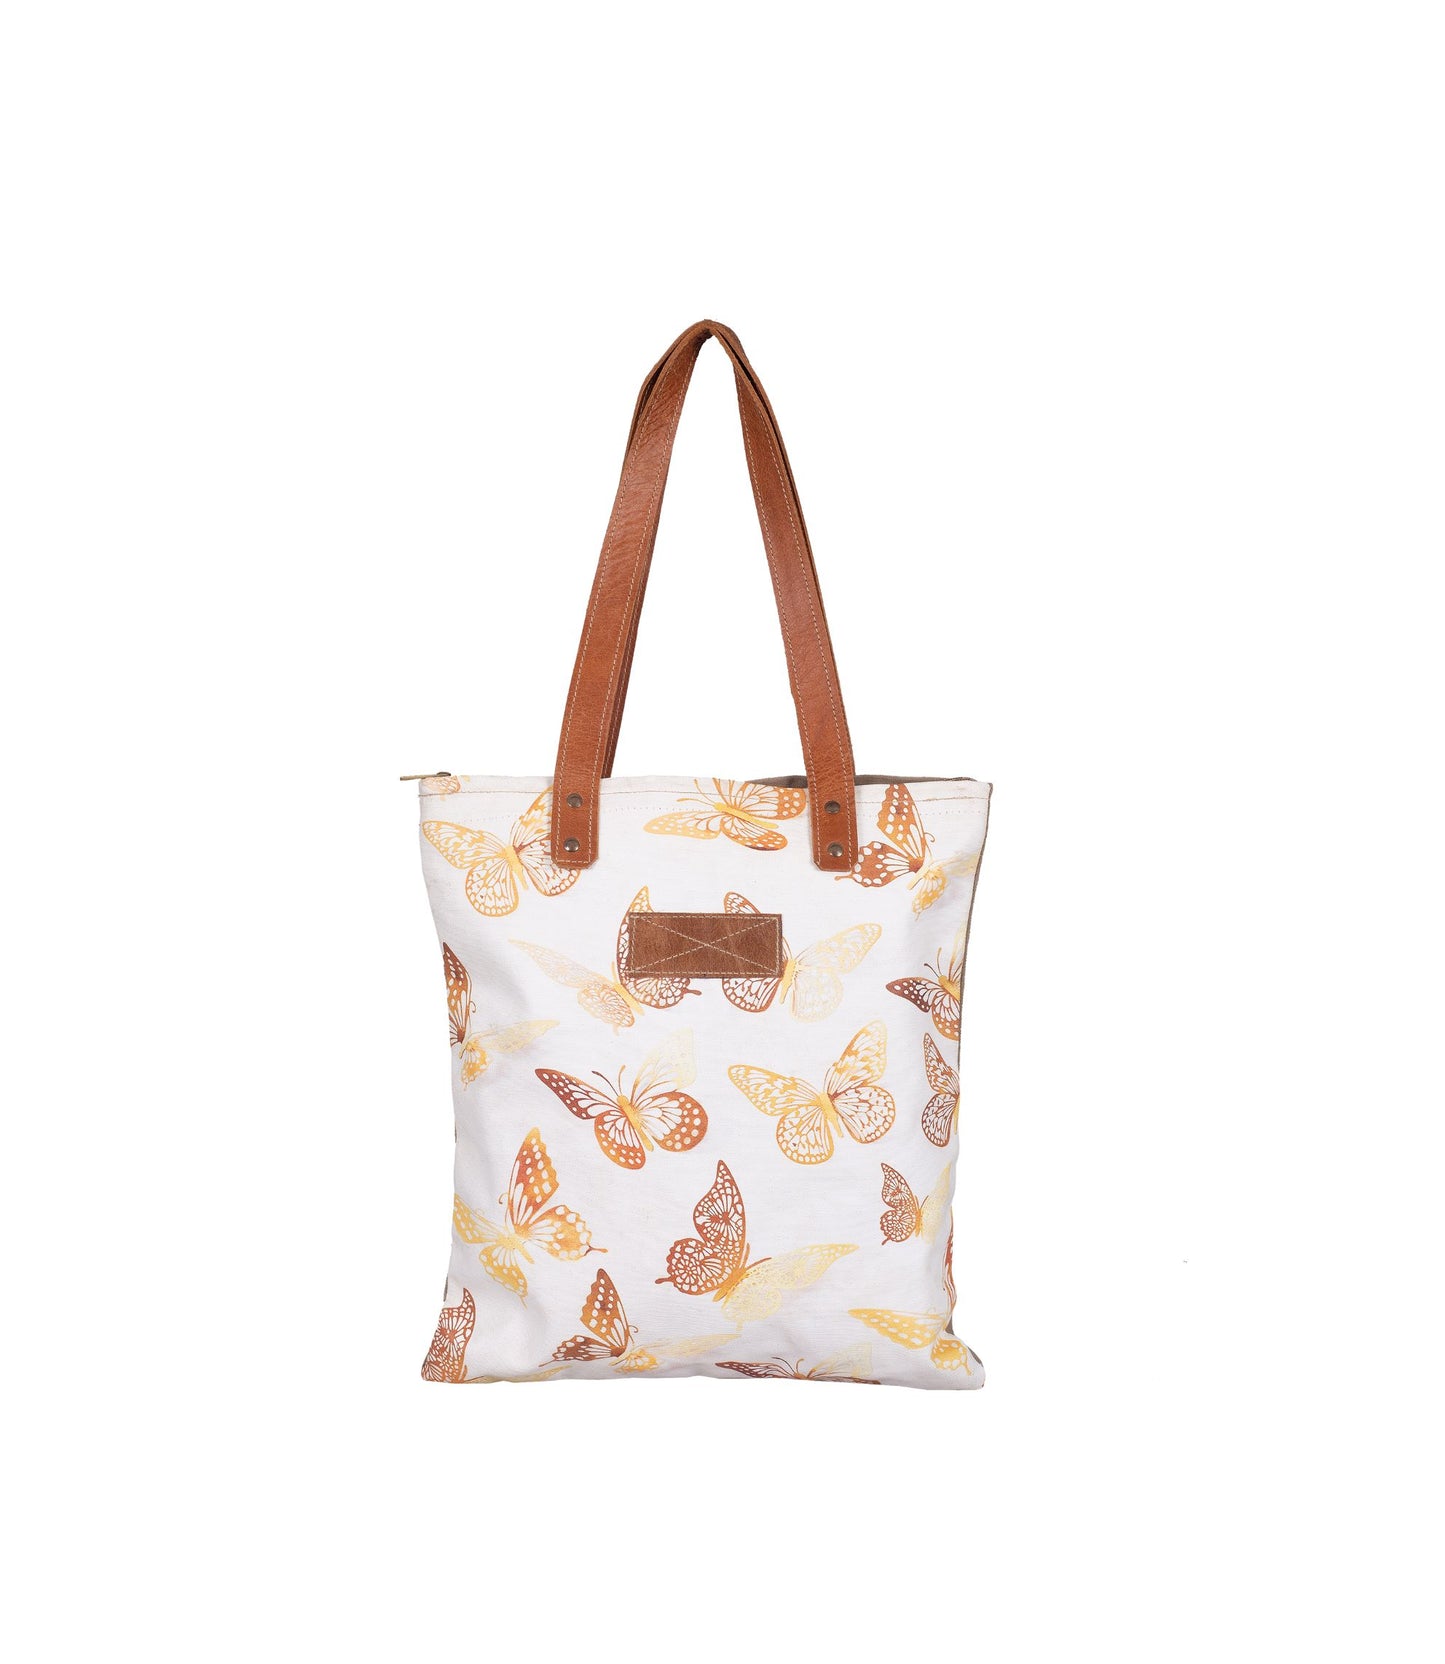 The Social Butterfly Tote Bag